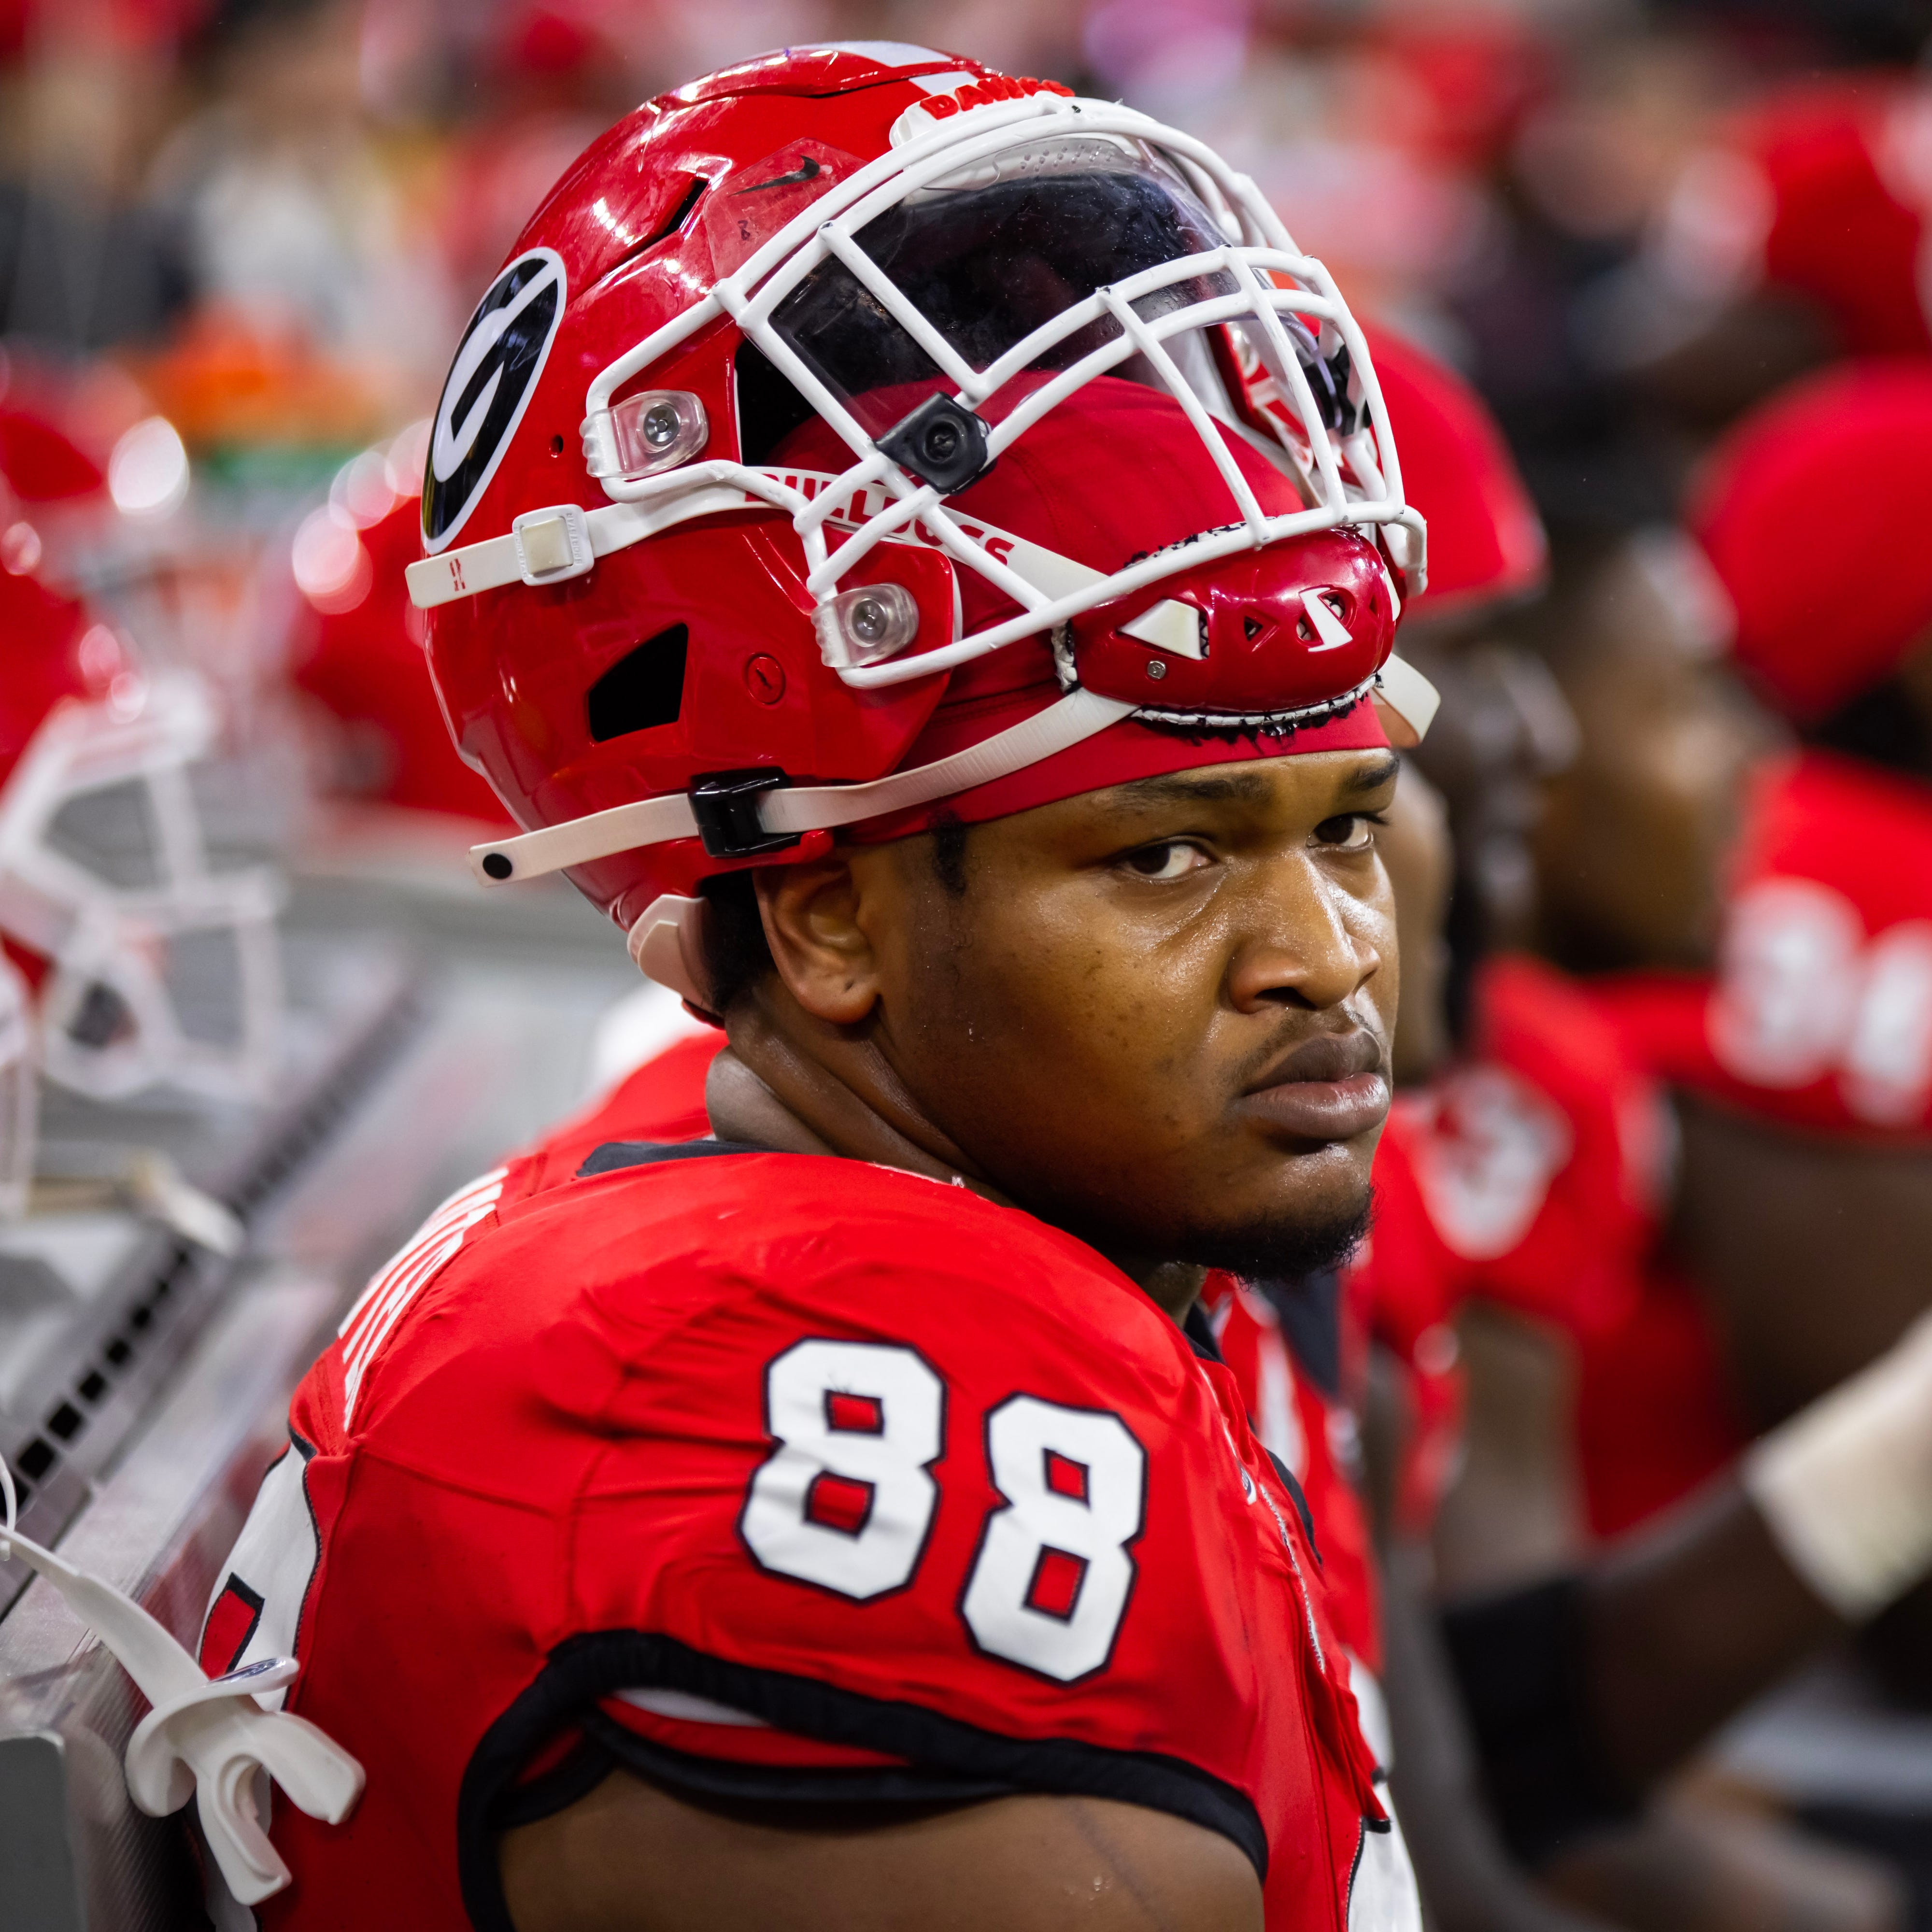 Georgia Bulldogs defensive lineman Jalen Carter (88) against the TCU Horned Frogs during the CFP national championship game at SoFi Stadium.